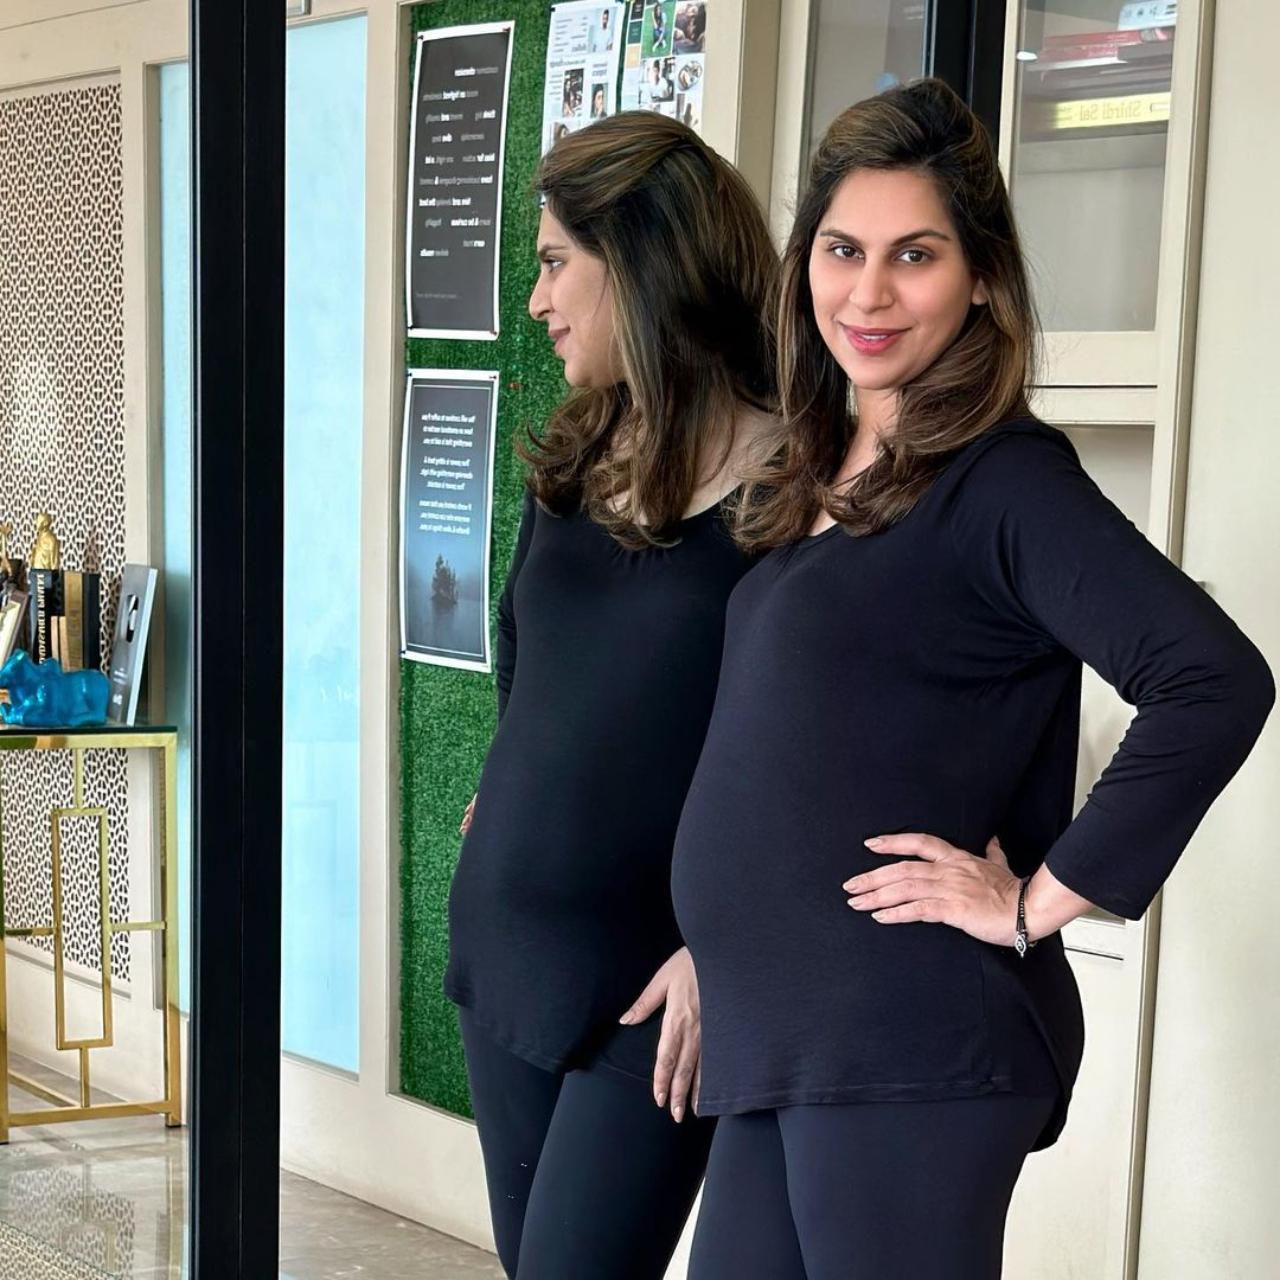 On Mother's Day, Upasana shared a picture of her baby bump and captioned it with an empowering message with resonated with women and mothers-to-be across India. She said that her decision to have a baby was when she felt physically and emotionally prepared for parenthood, and not to strengthen her marriage or carry on a legacy or lineage. 